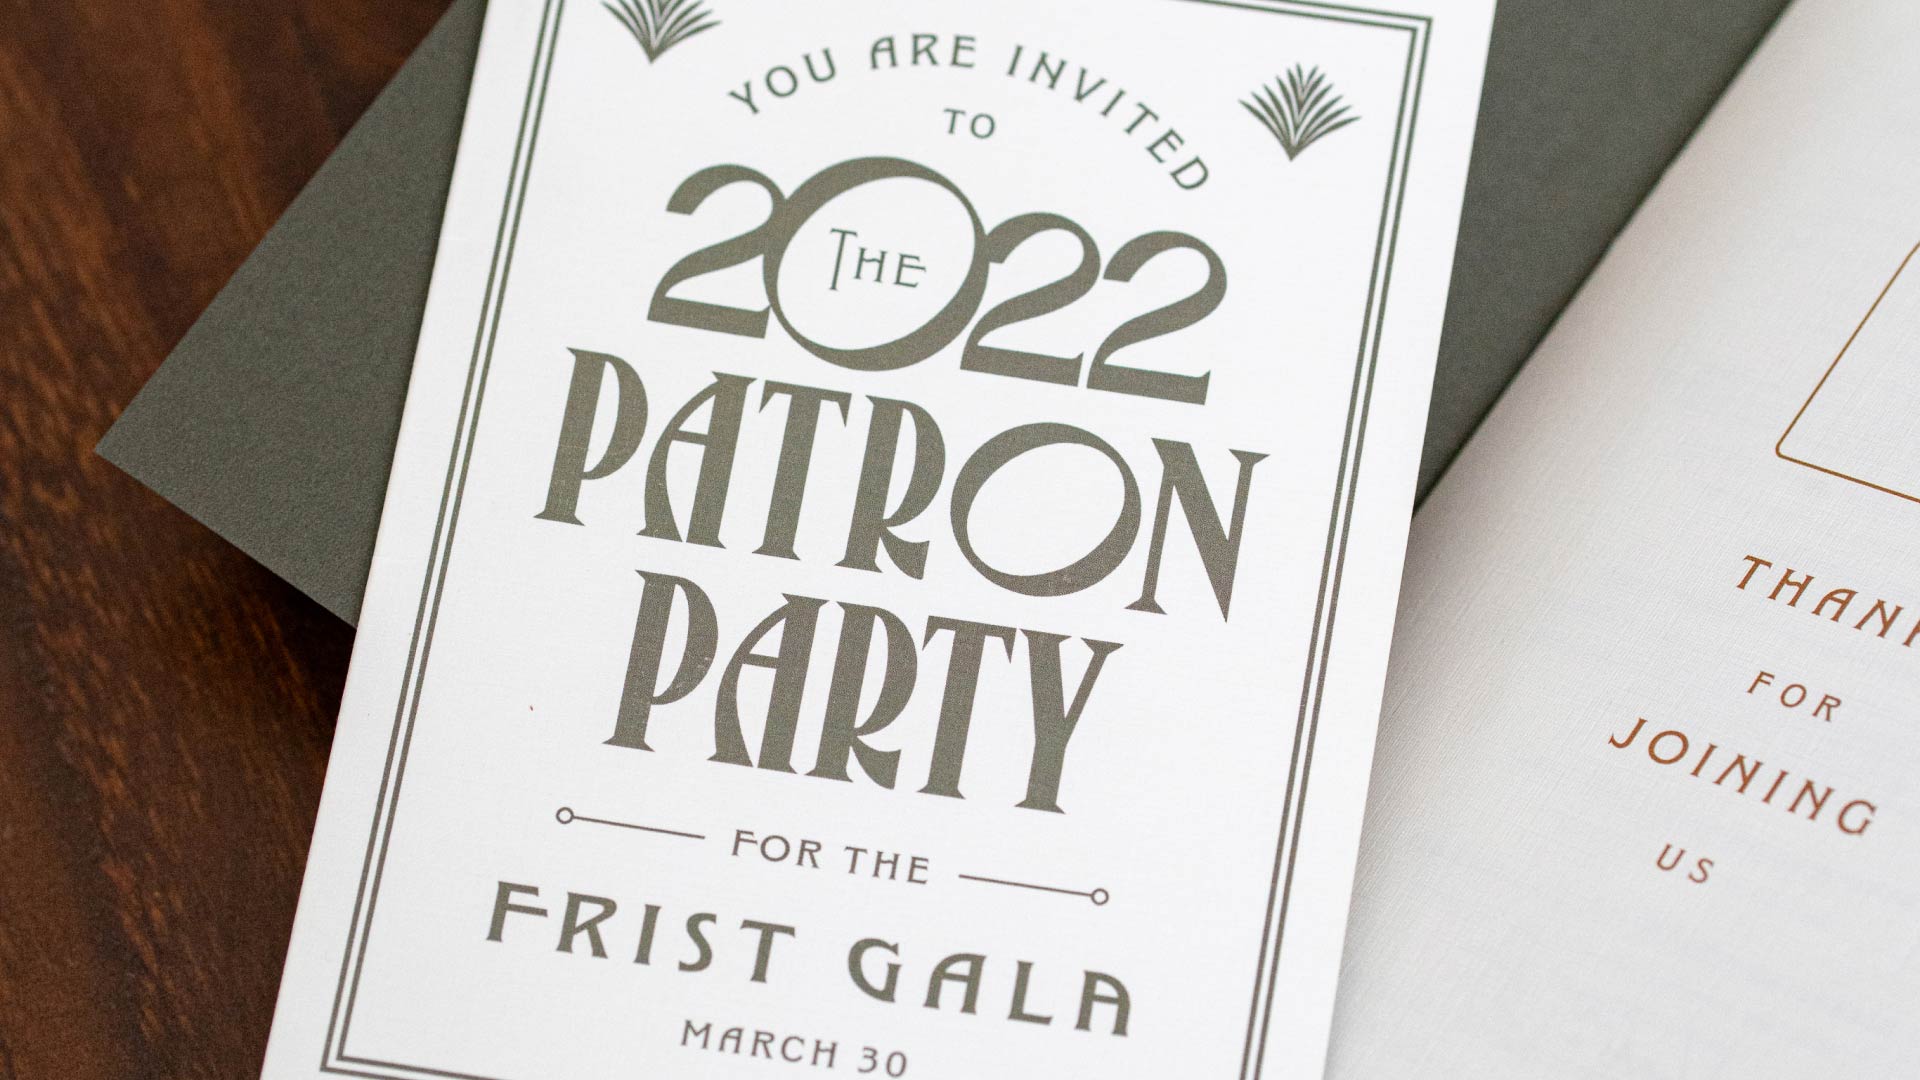 Photo of the 2022 Patron Party for the First Gala invitation